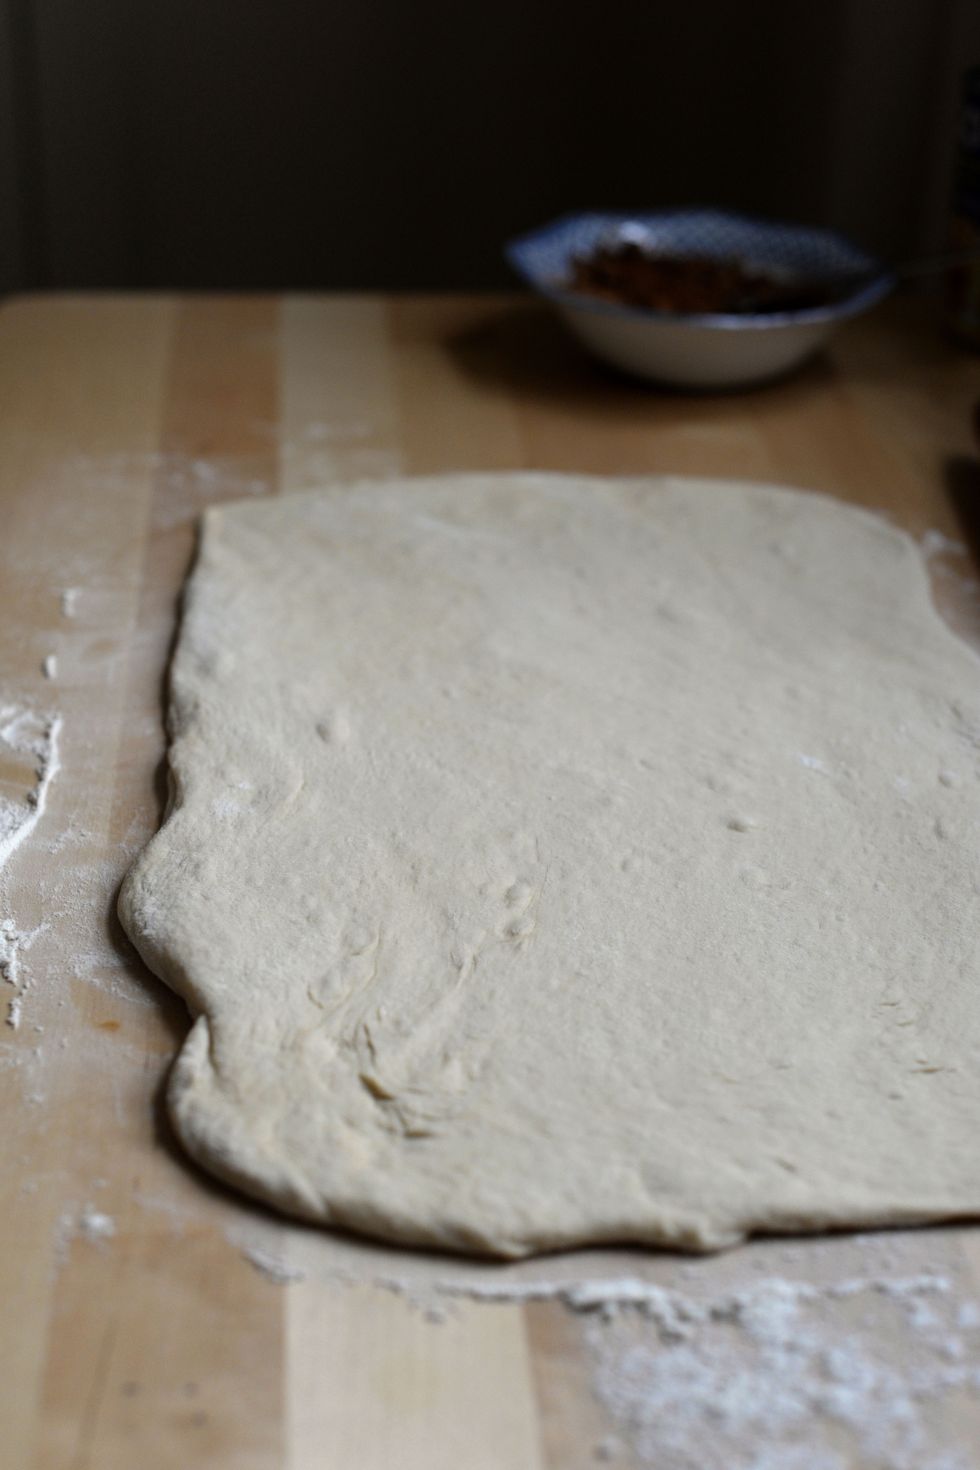 Dough made with chickpea water.